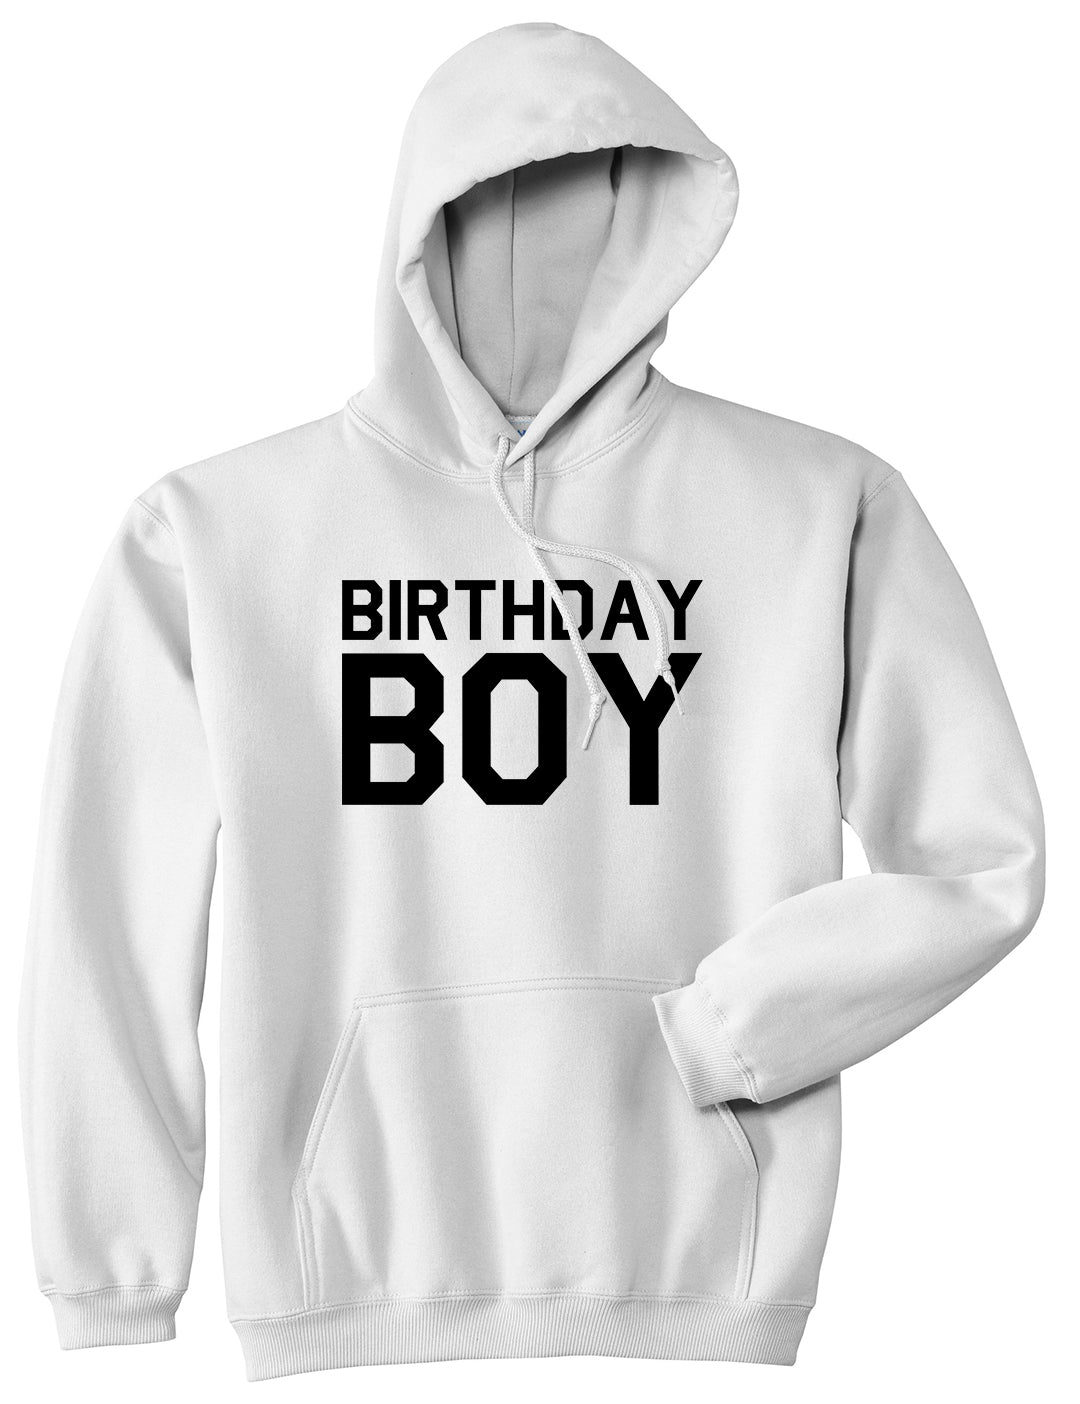 Birthday Boy White Pullover Hoodie by Kings Of NY